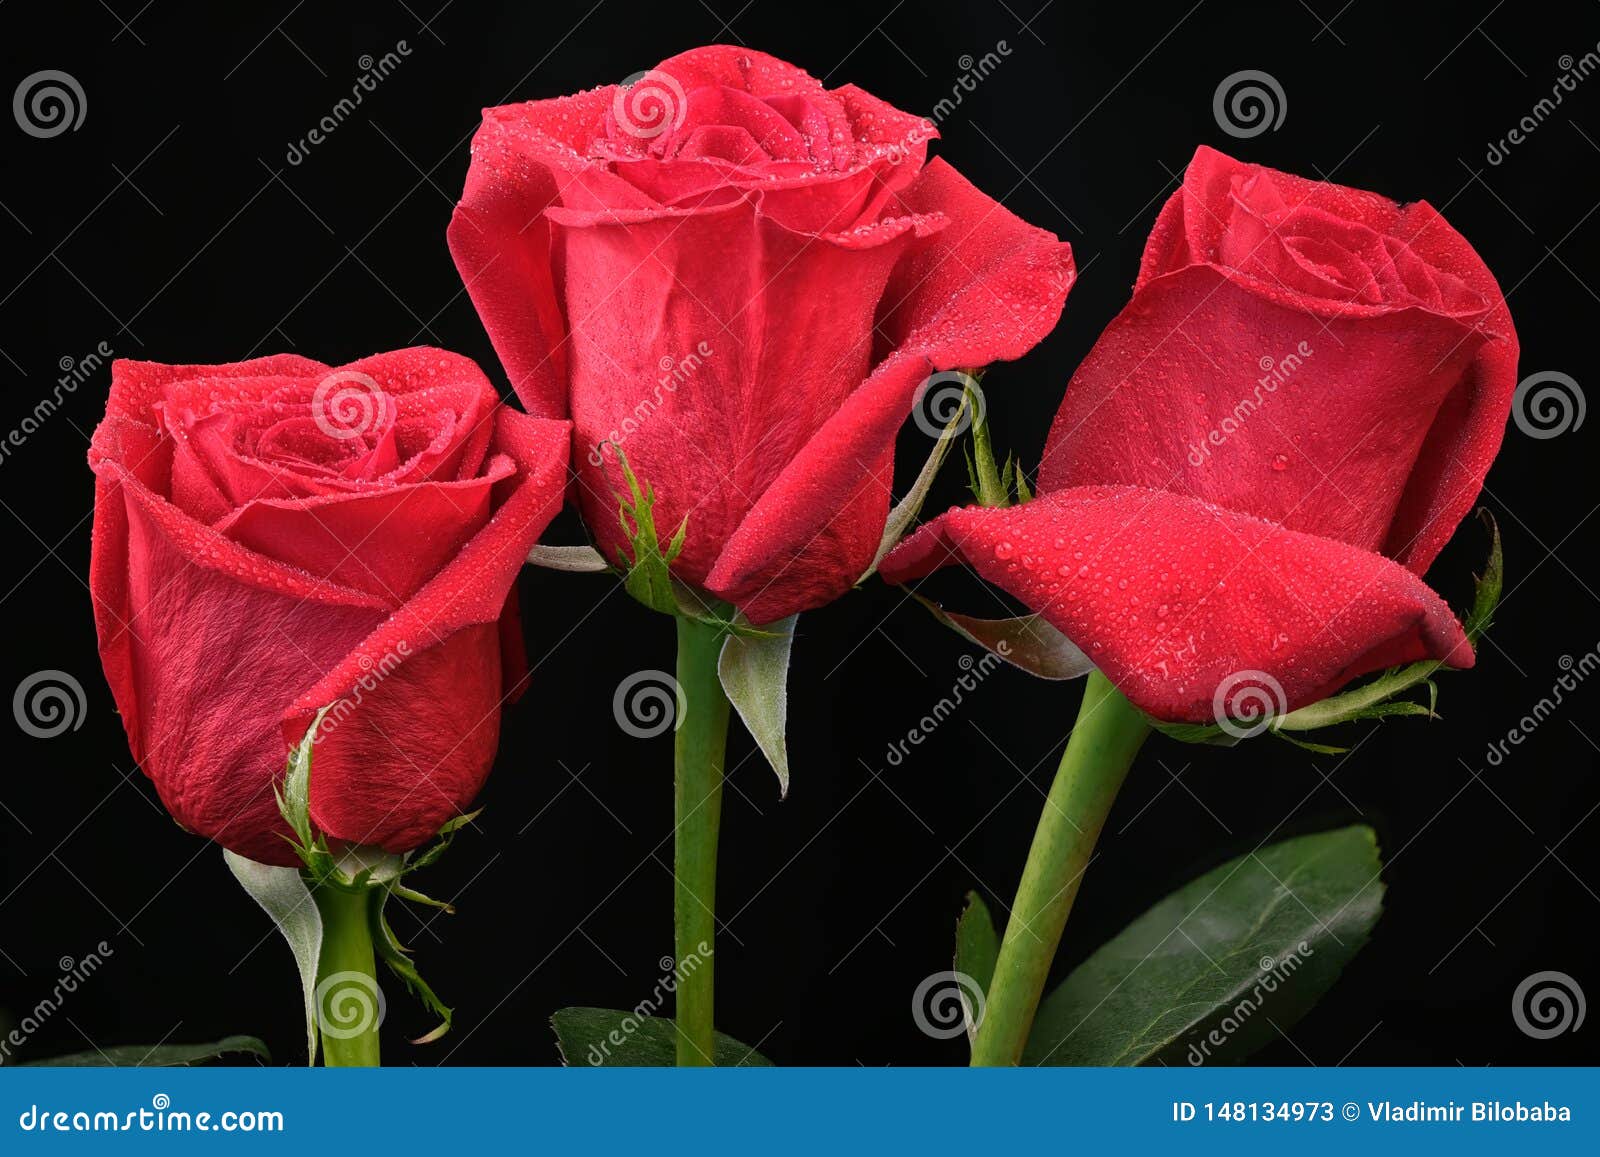 Blooming Bud Of Red Rose Stock Image Image Of Flores 148134973